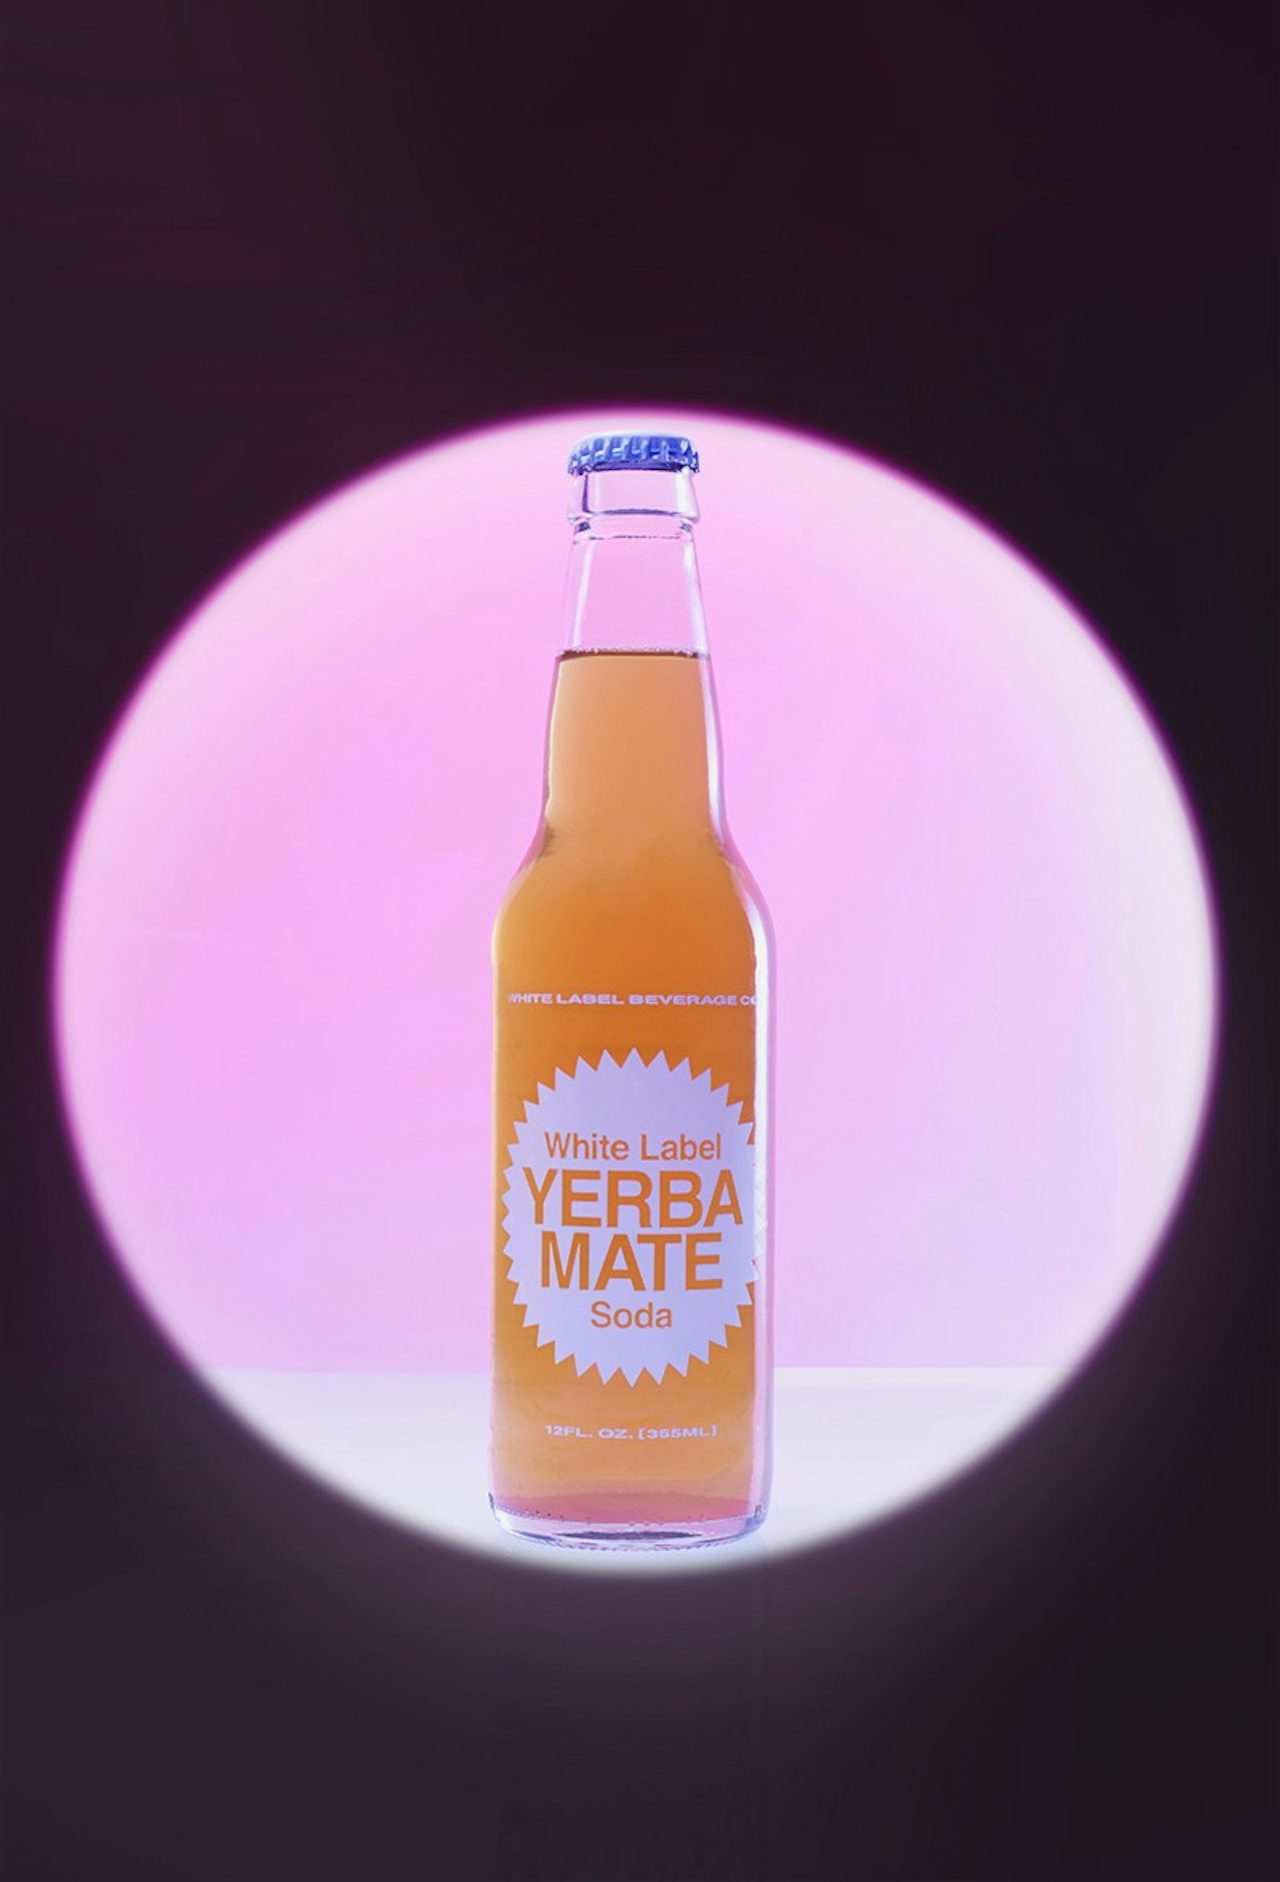 Club-Mate, the Berlin clubbers' drink